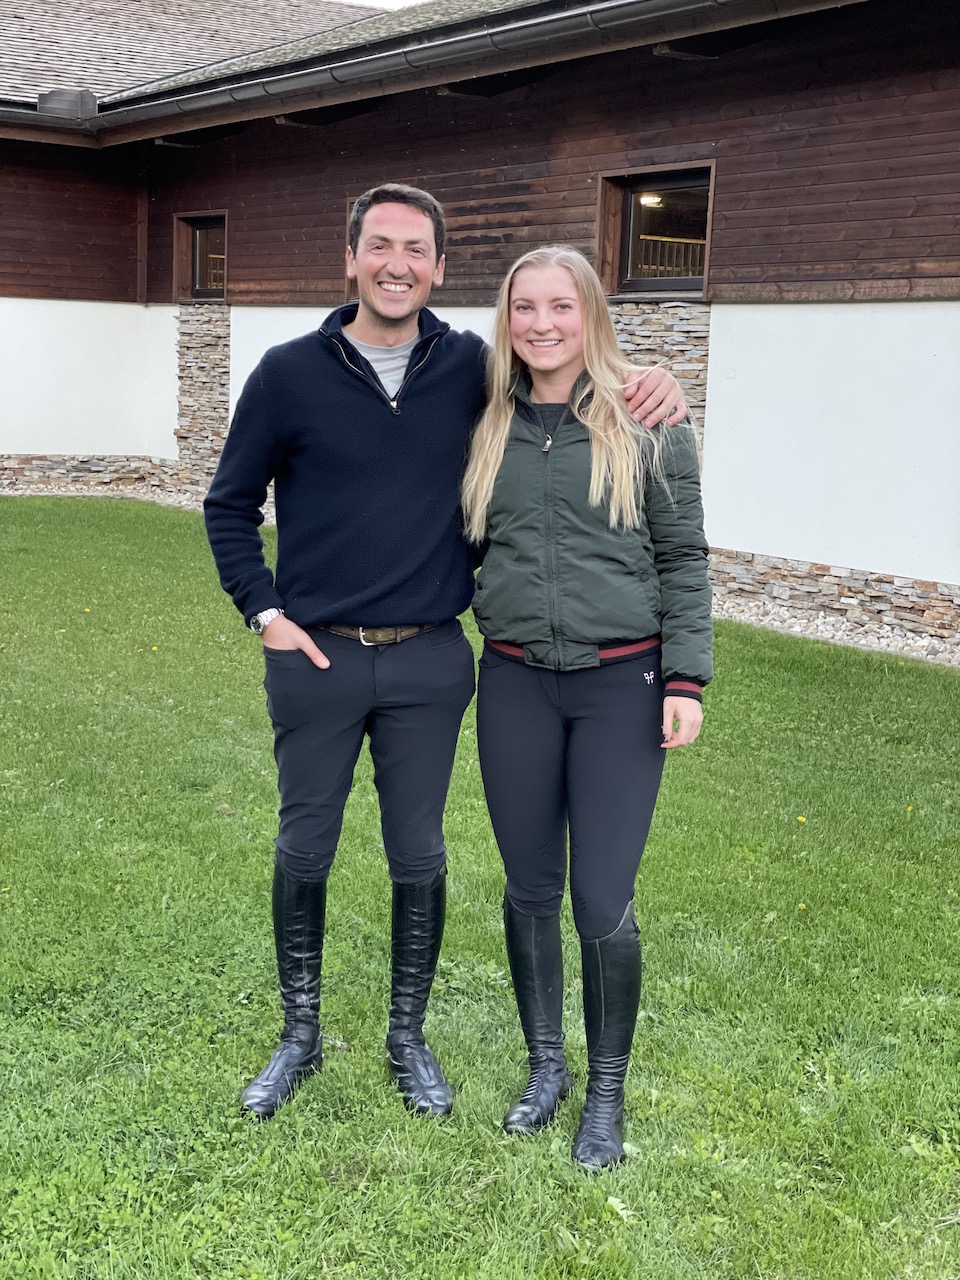 Lorenzo de Luca moves to Poden Farms as trainer of Emily Moffit